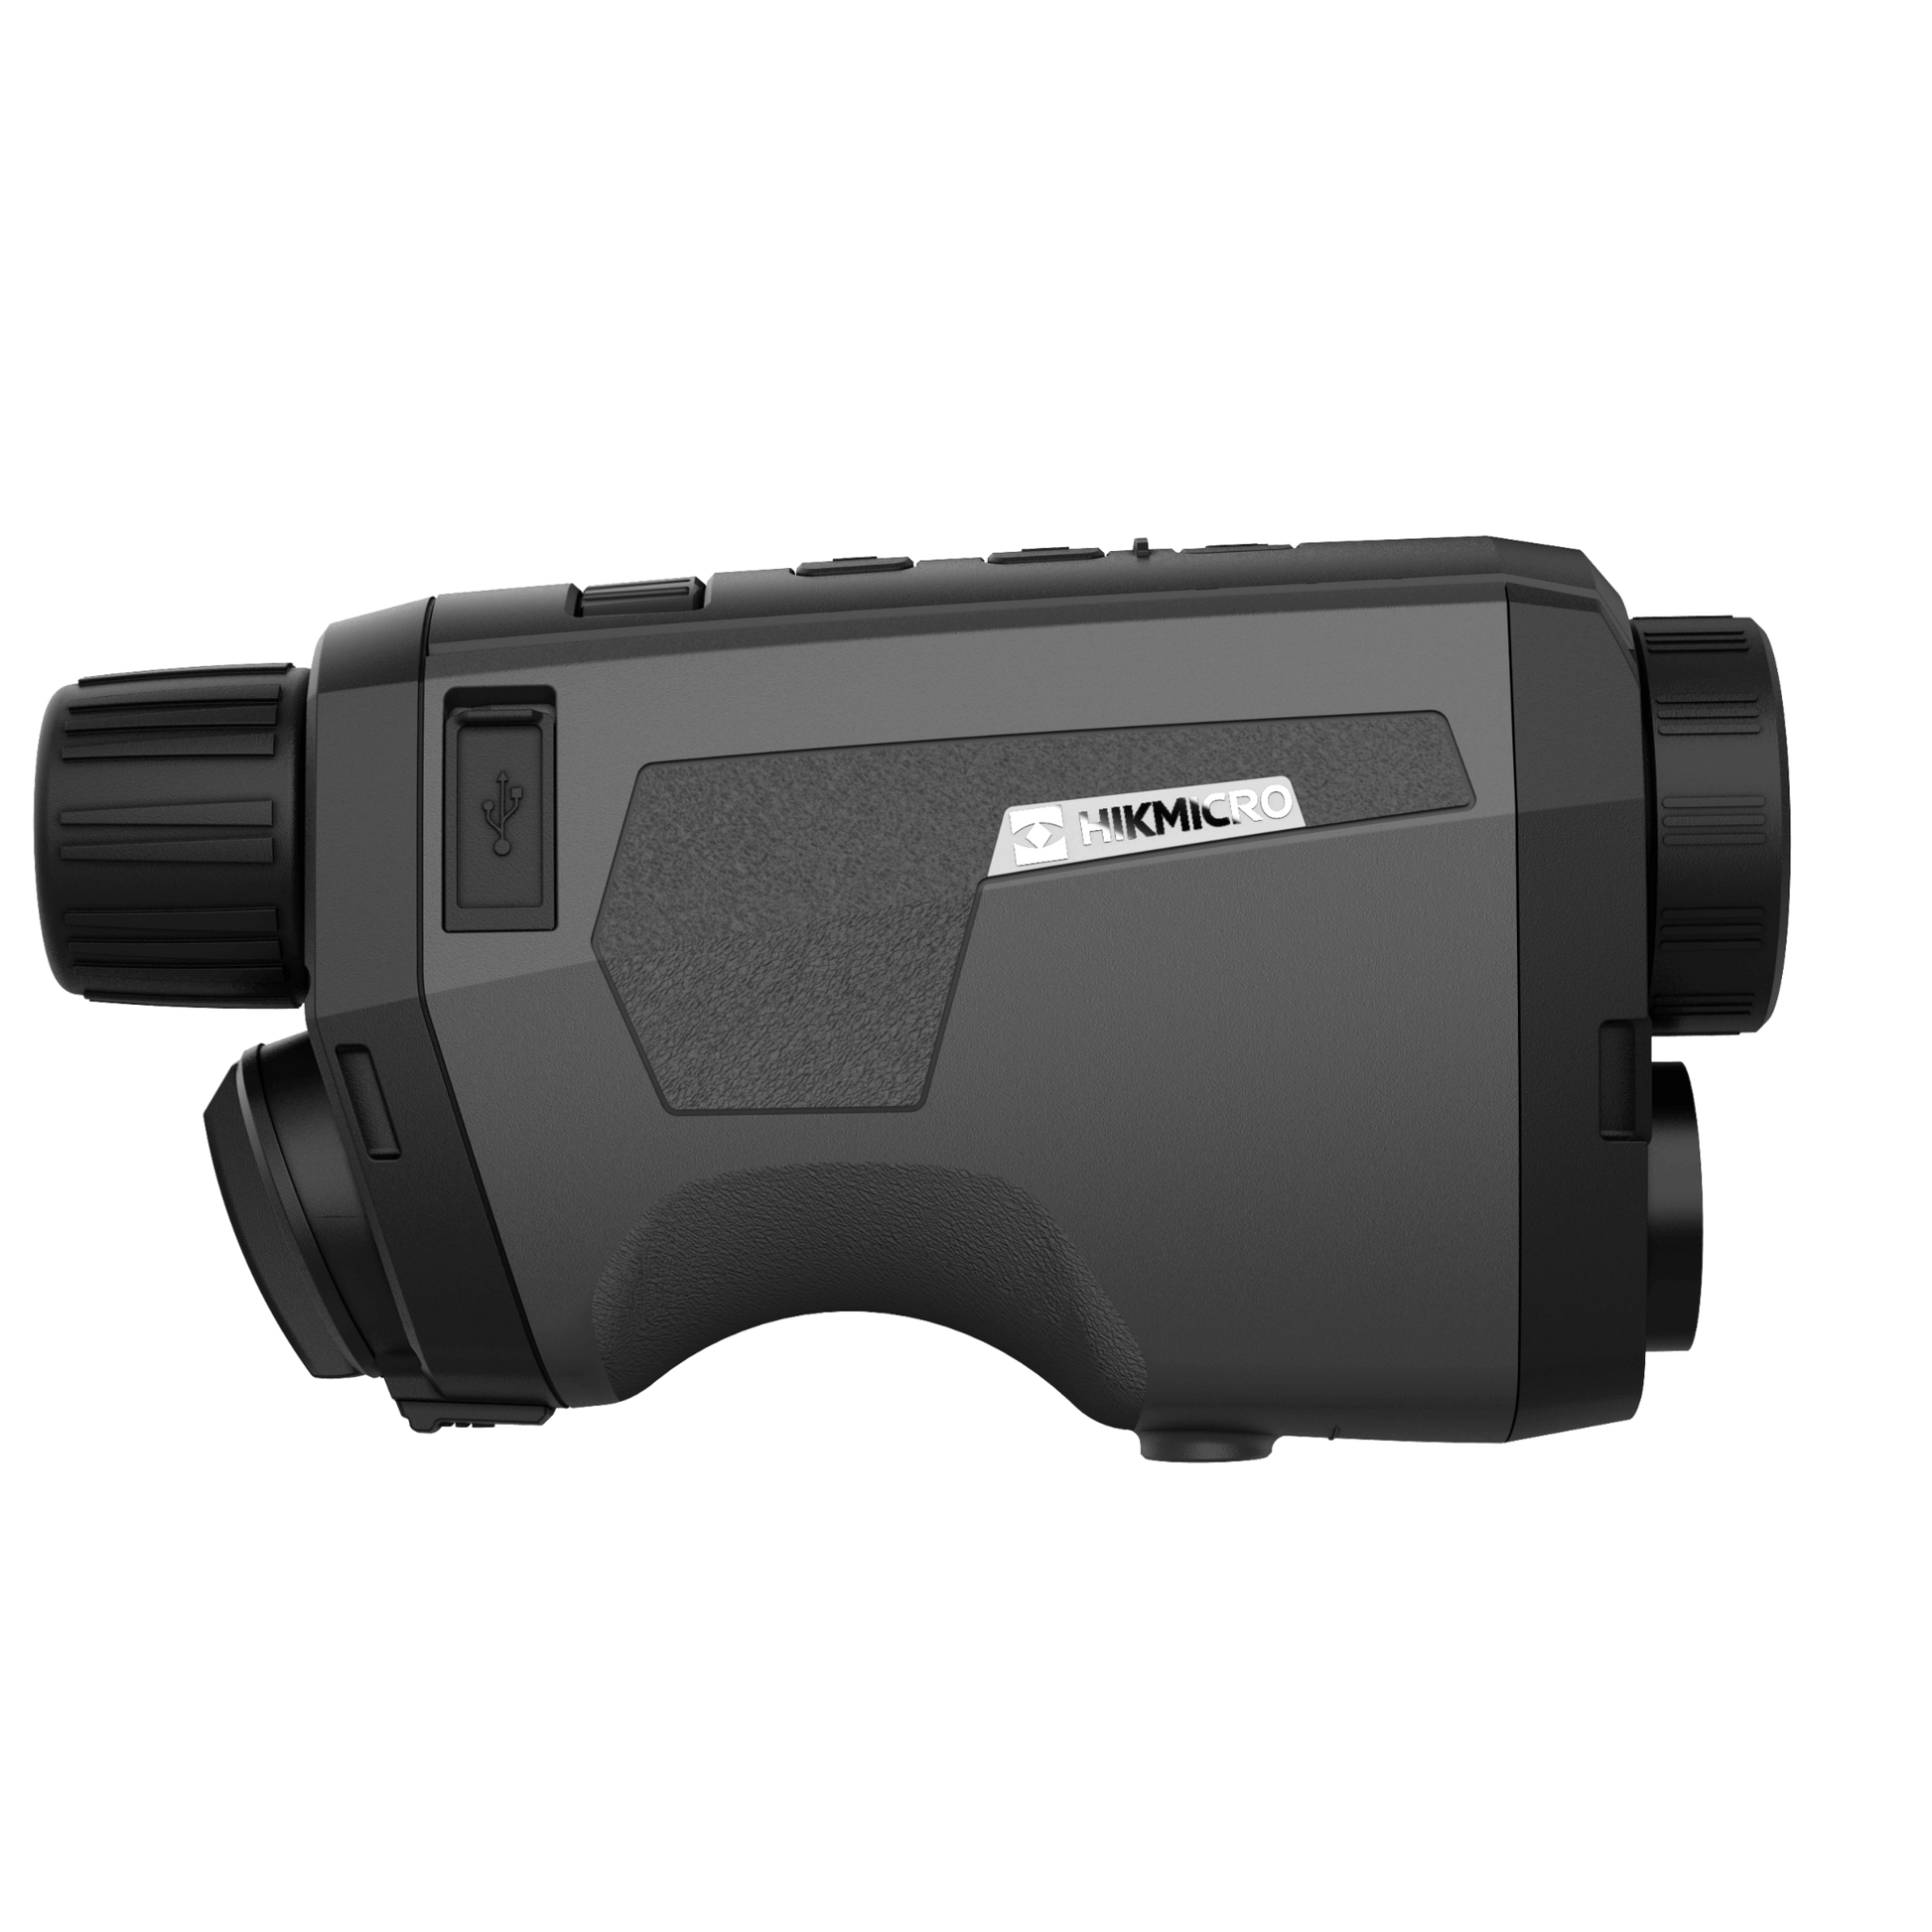 Cape Thermal imaging monocular for sale - HikMicro Gryphon GH25L Handheld thermal monocular right view